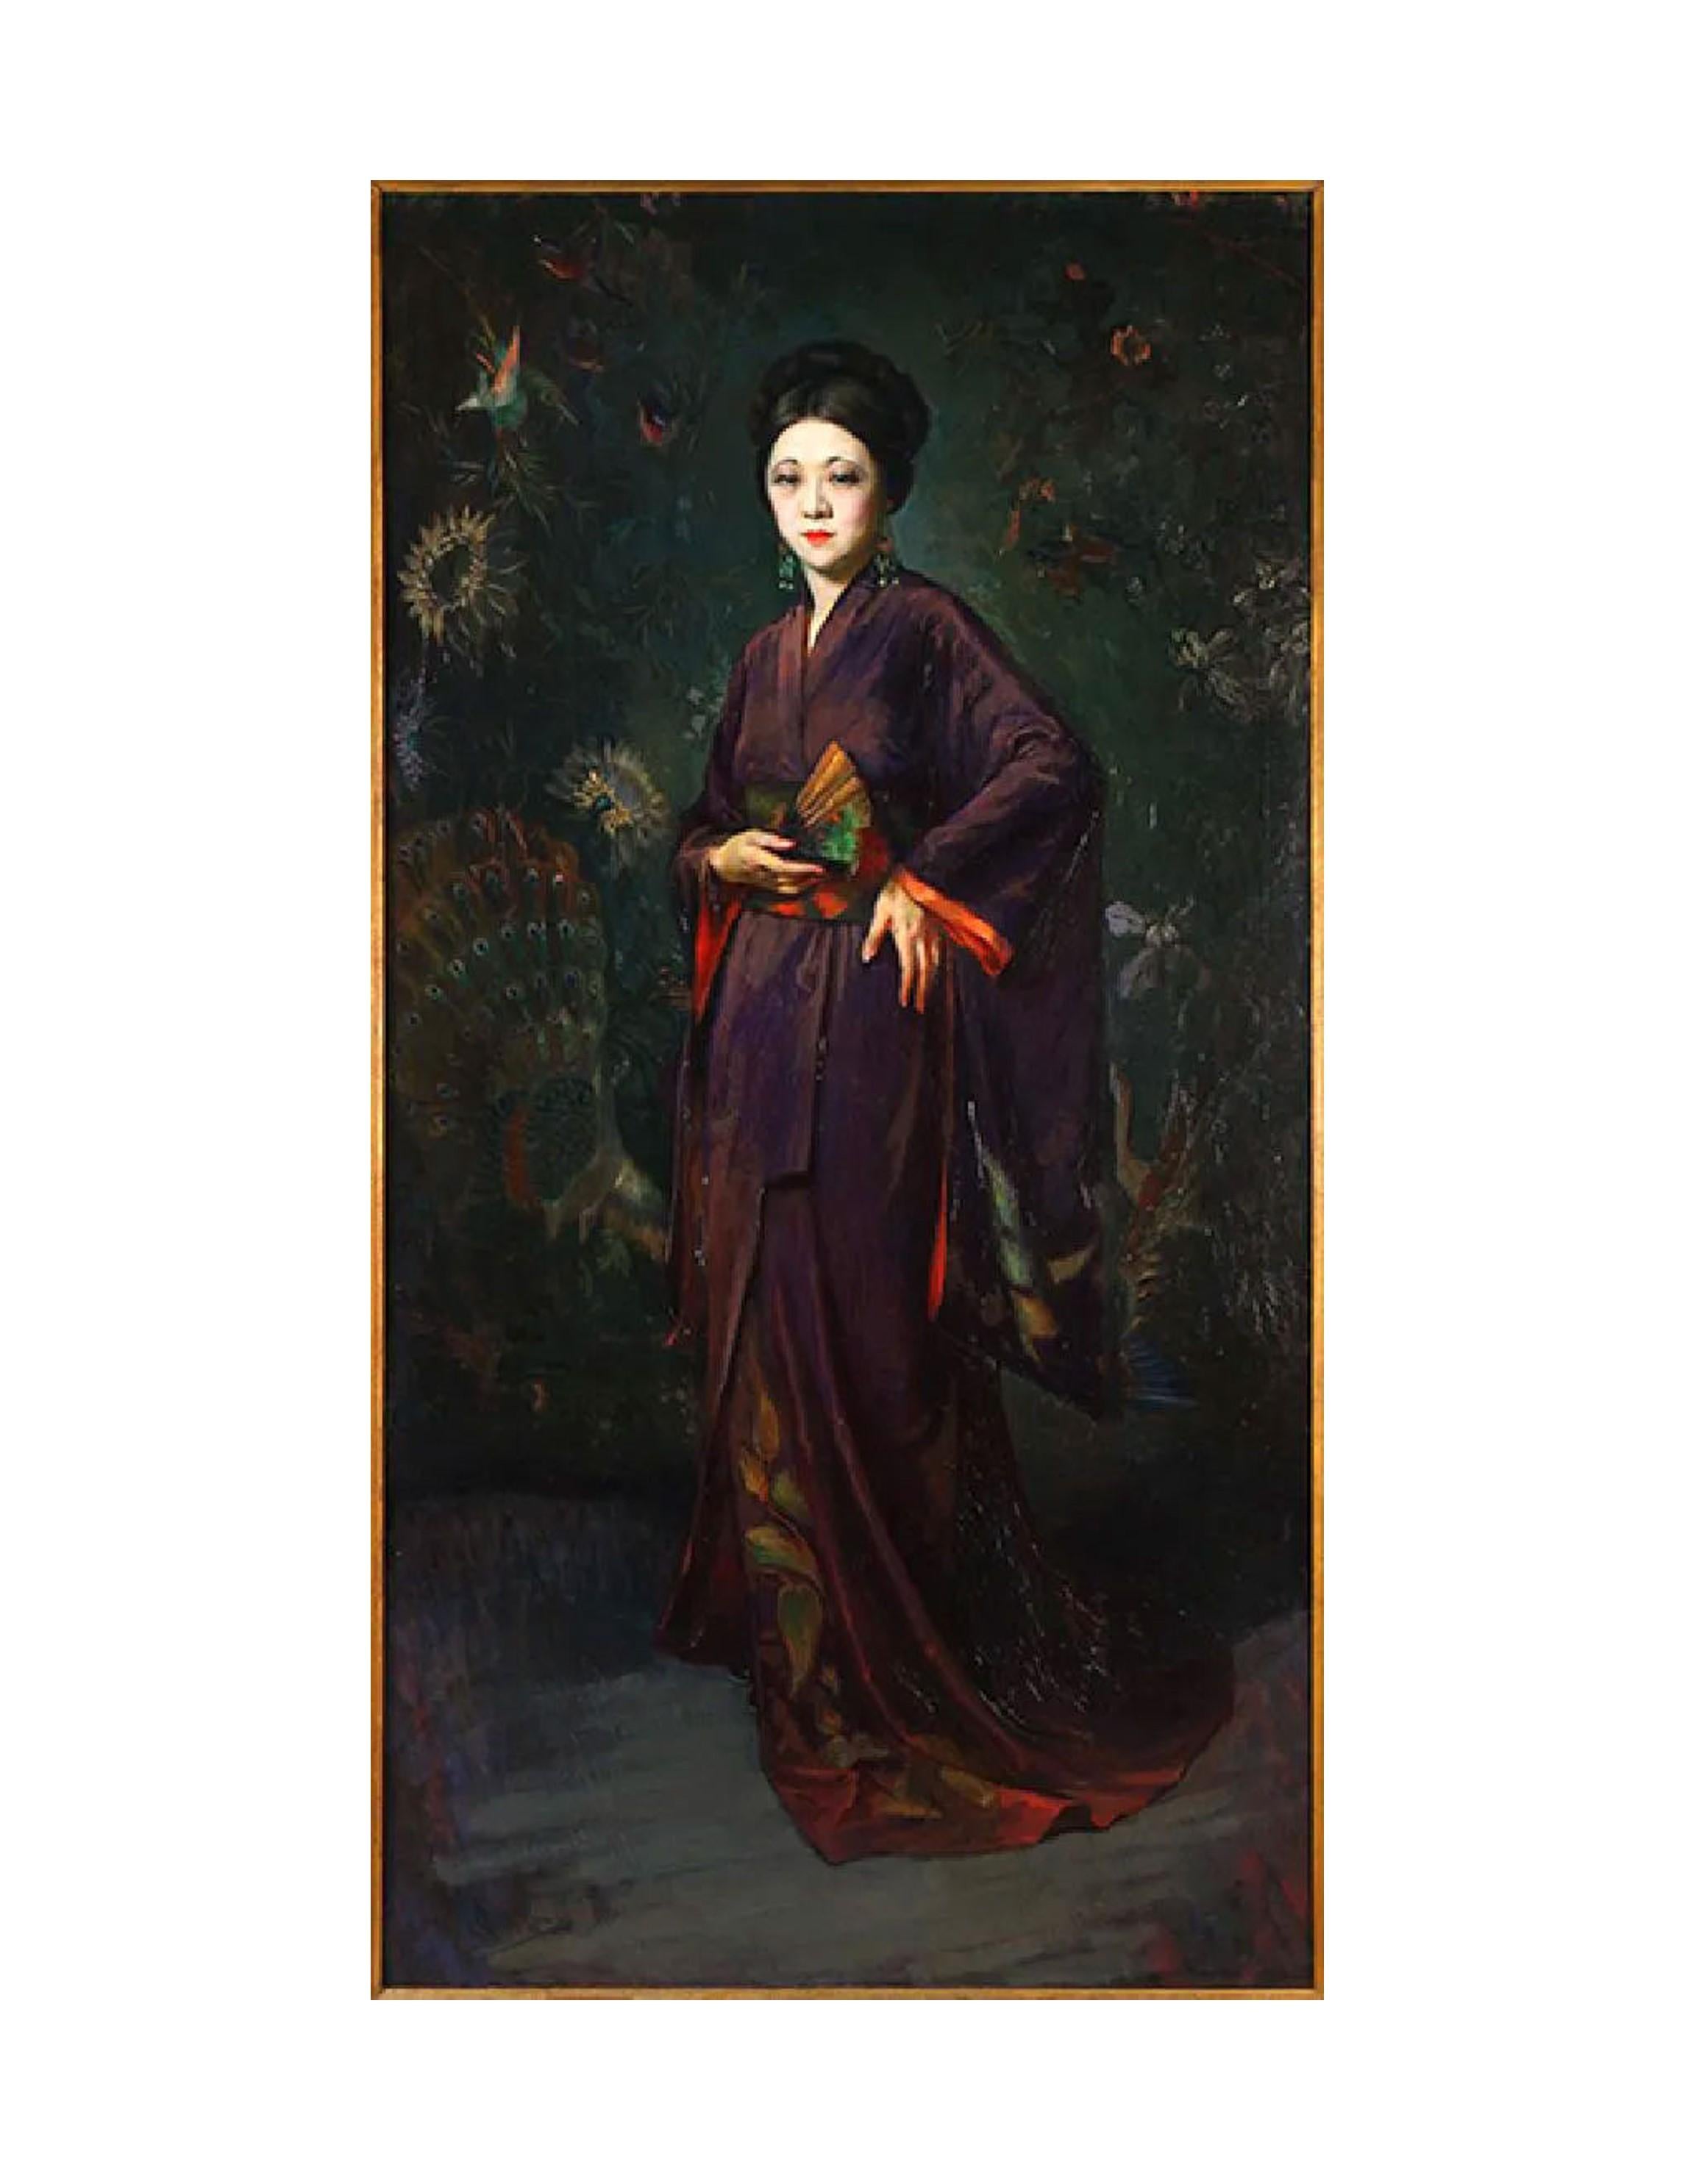 Our very large, full-length portrait of a distinguished Japanese lady in kimono was painted by Greta Kempton (Austrian-American, 1903-1991), famous for her portraiture and role as the official White House painter under President Harry S. Truman.